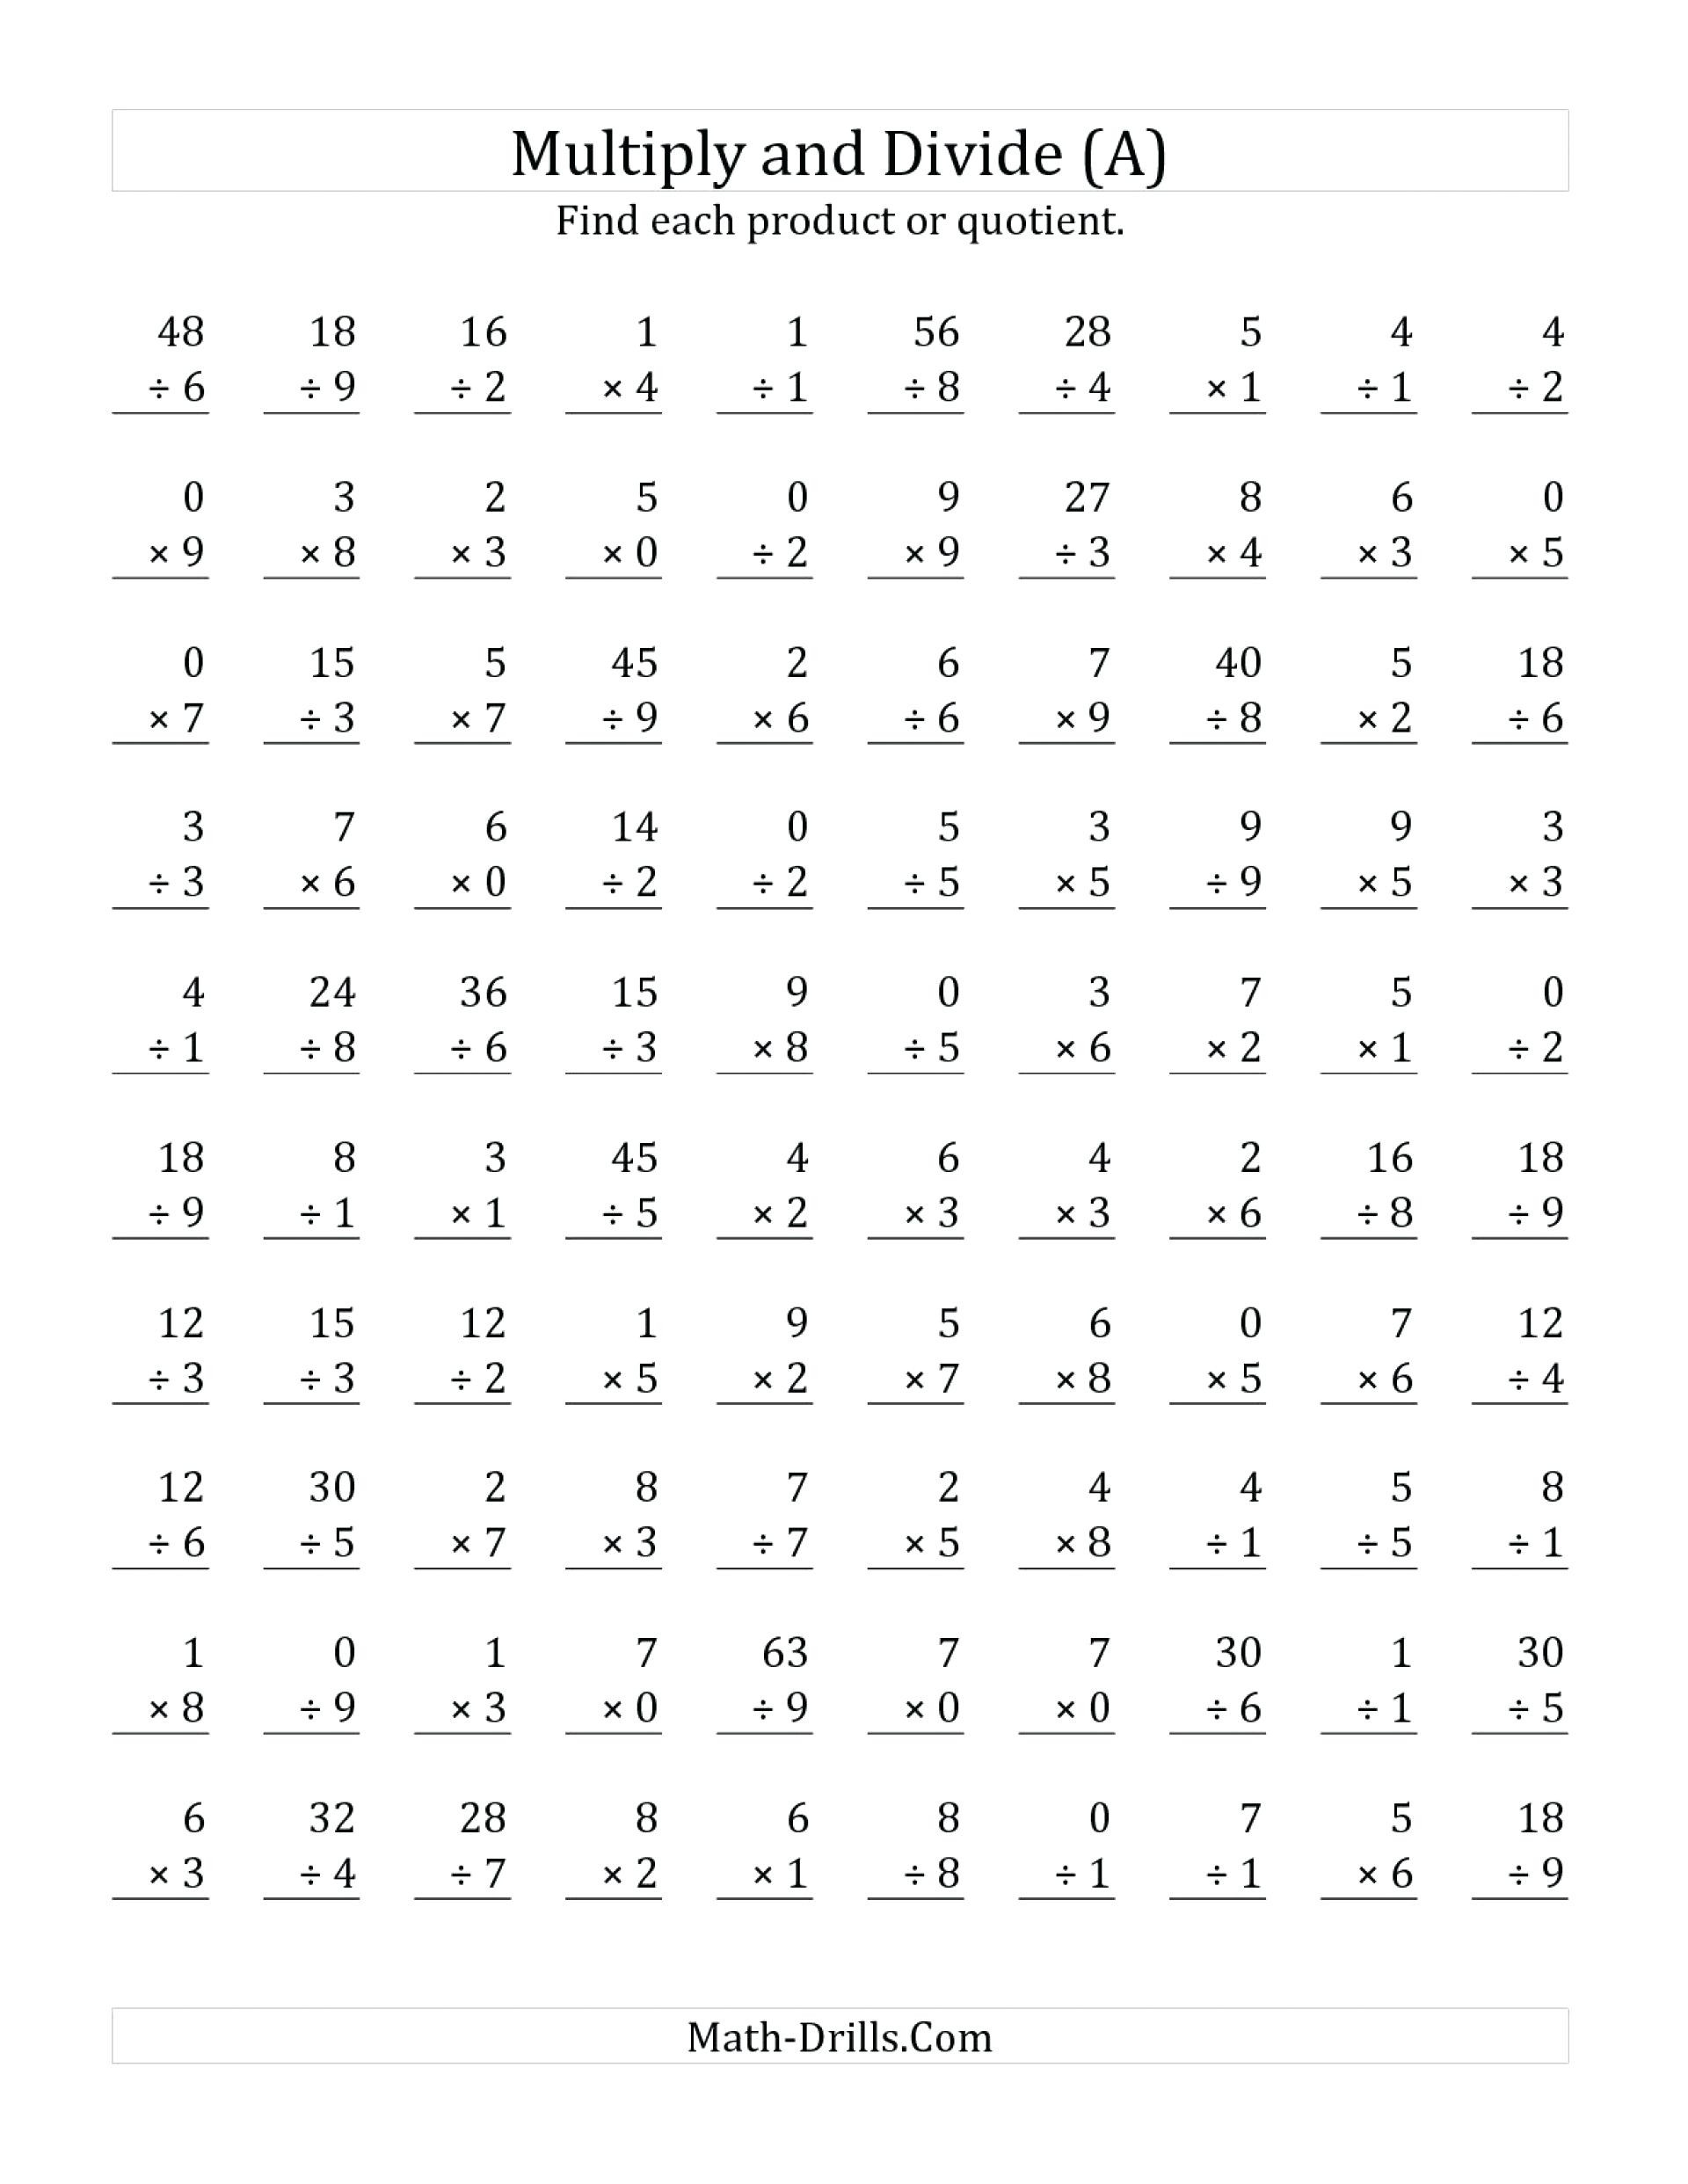 Free Math Worksheets Second Grade 2 Skip Counting Skip Counting by 5